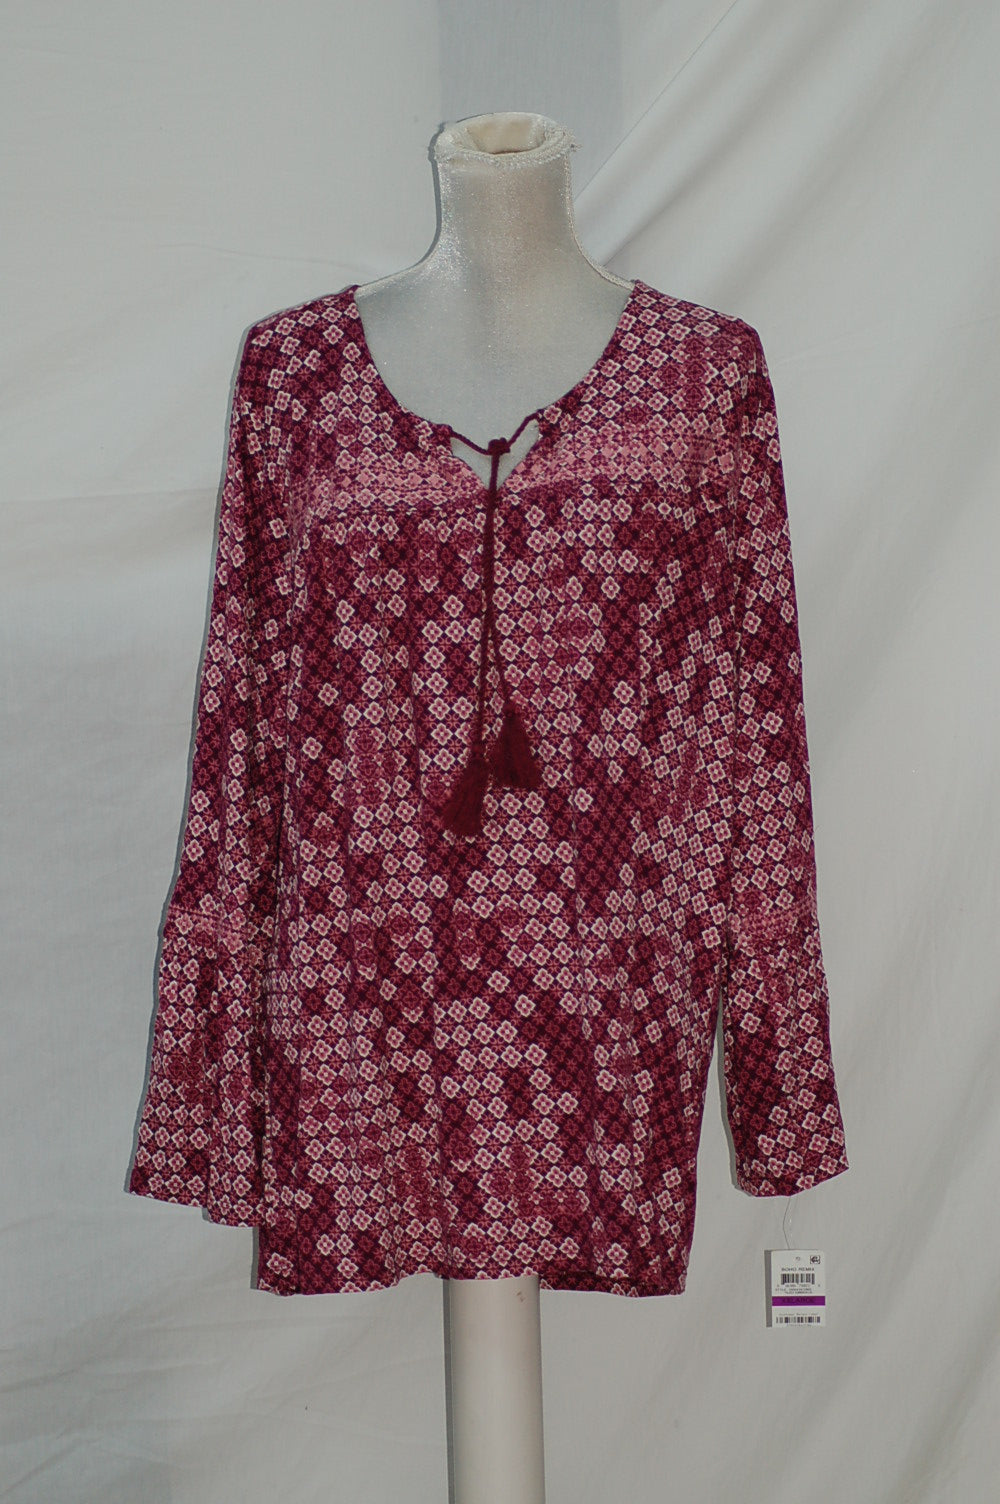 Style&co. Women Printed Embroidered Peasant Blouse Tiled Embrace XL